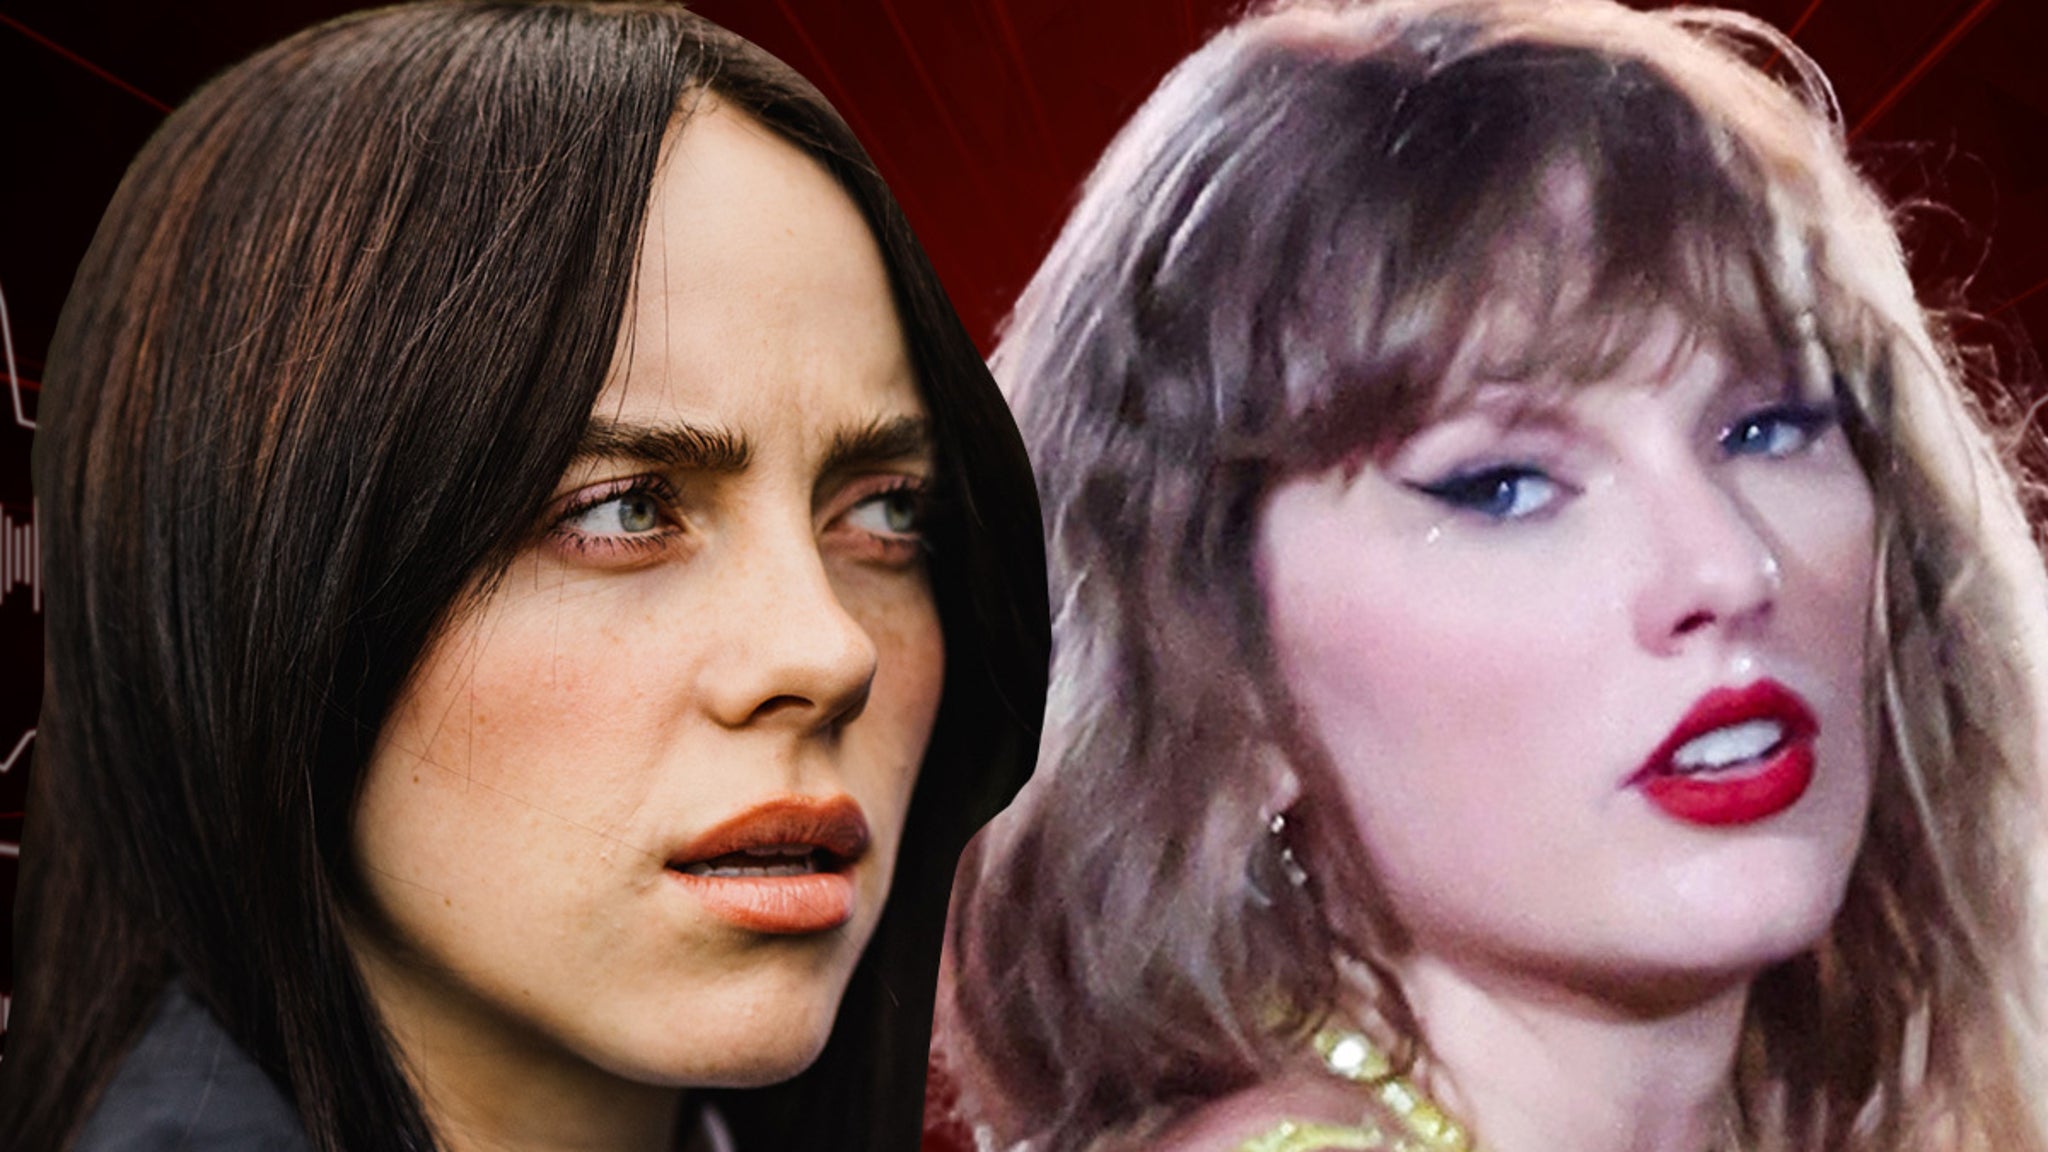 Billie Eilish Appears to Shade Taylor Swift, Calls 3 Hour Concerts ‘Psychotic’